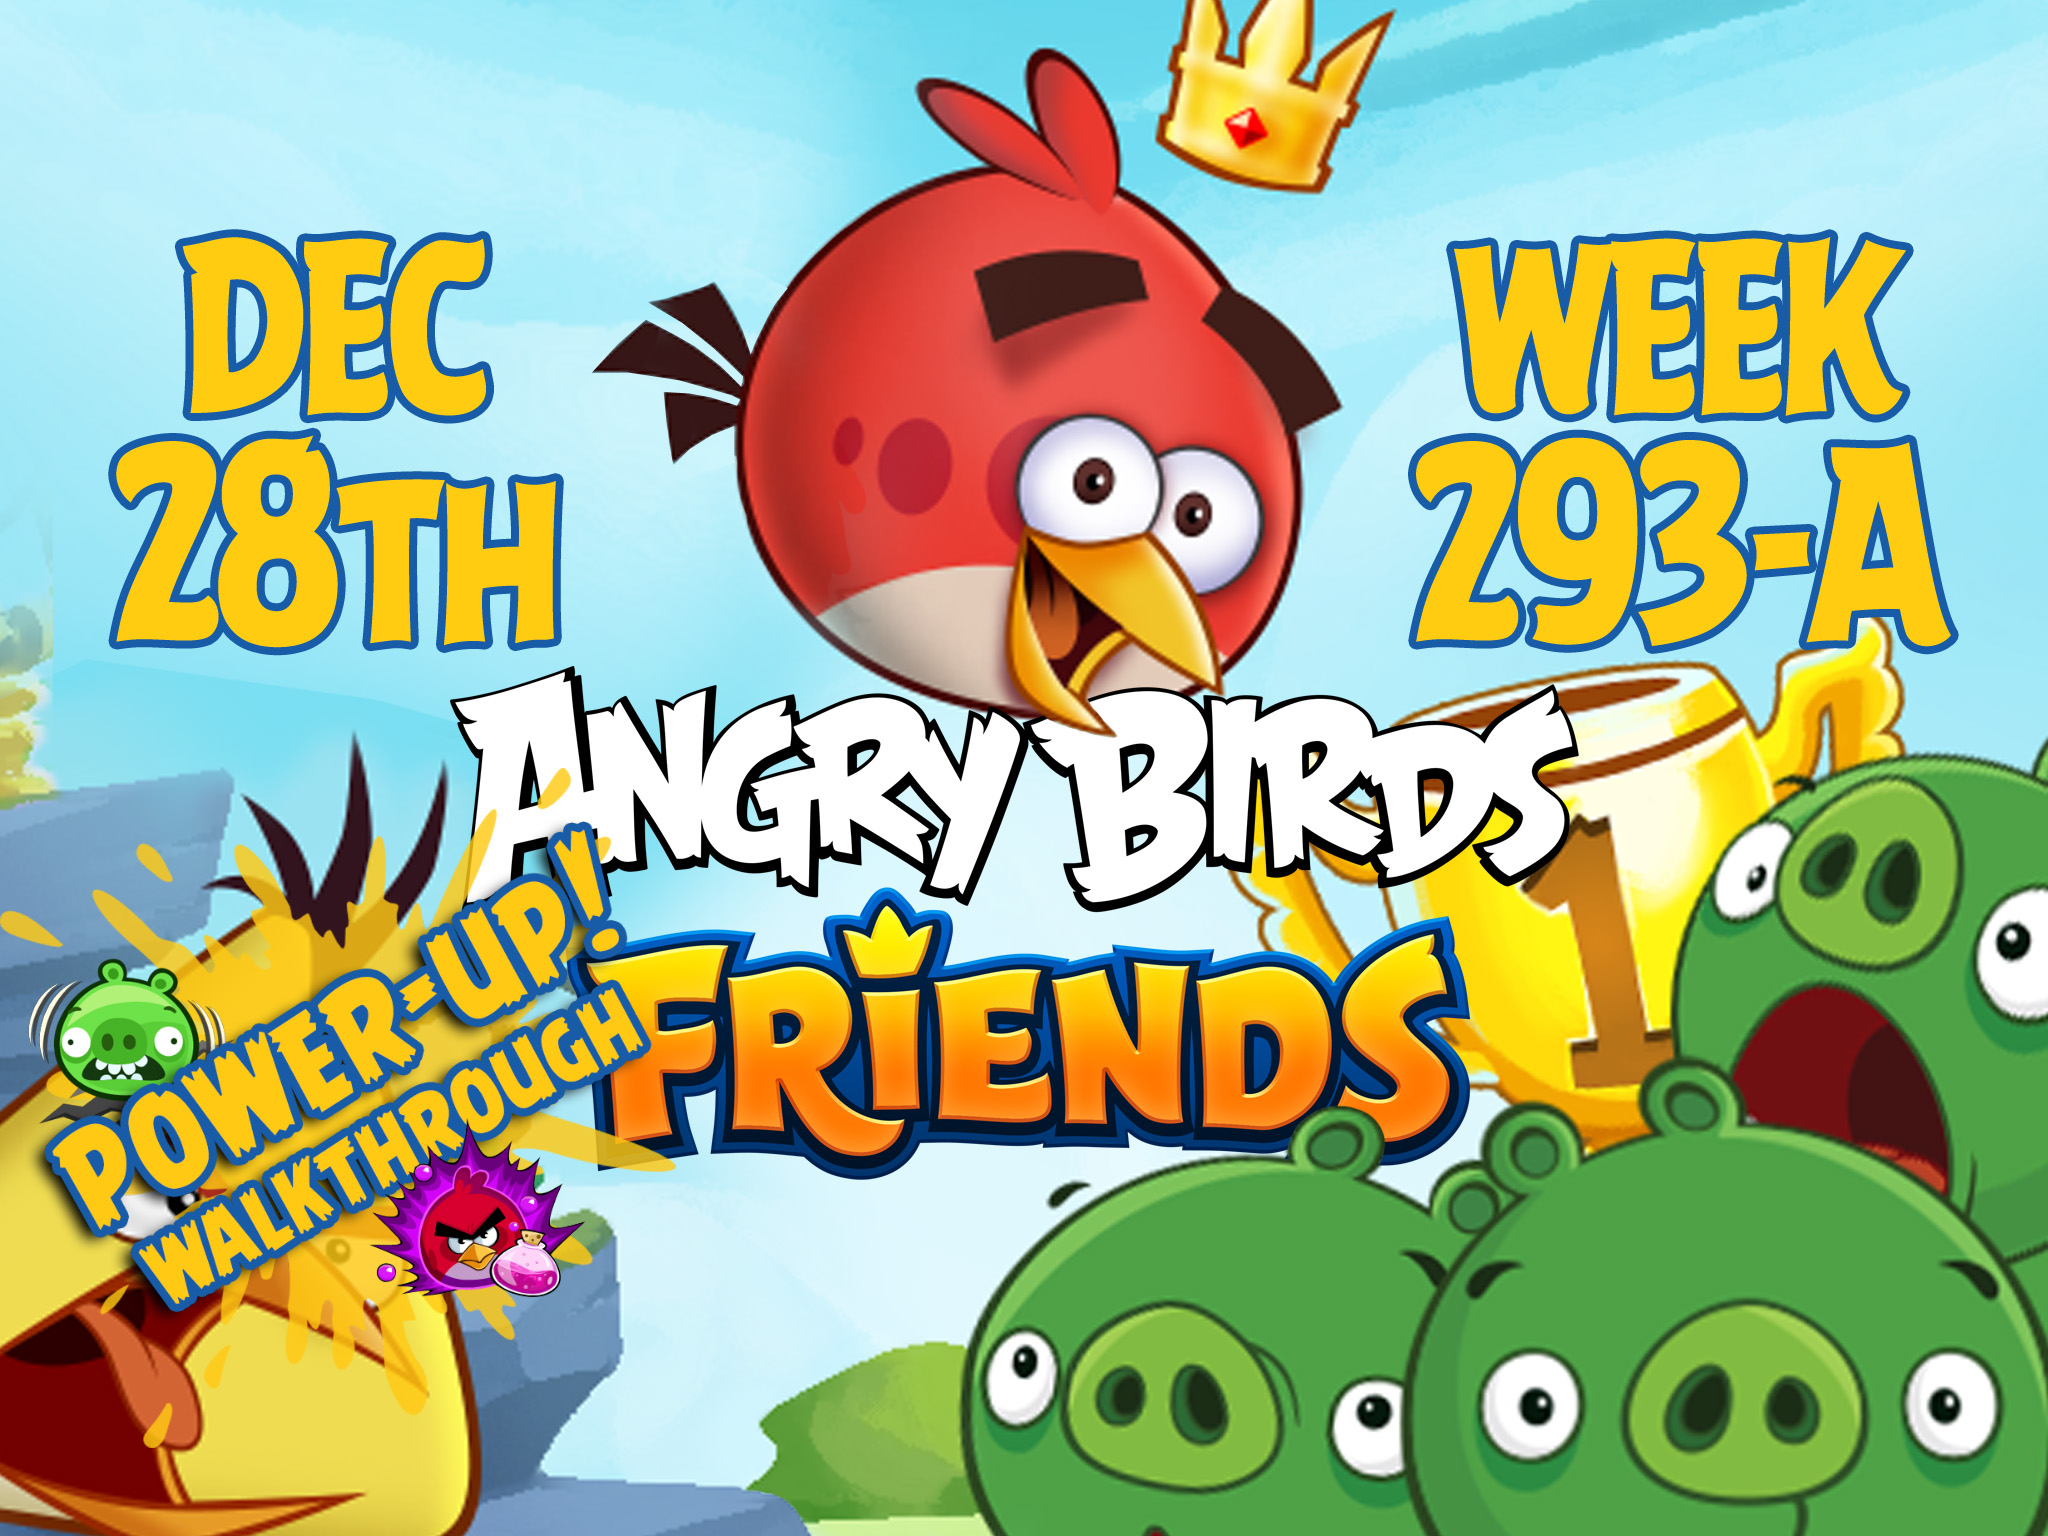 Angry Birds Friends Tournament Week 293-A Feature Image PU